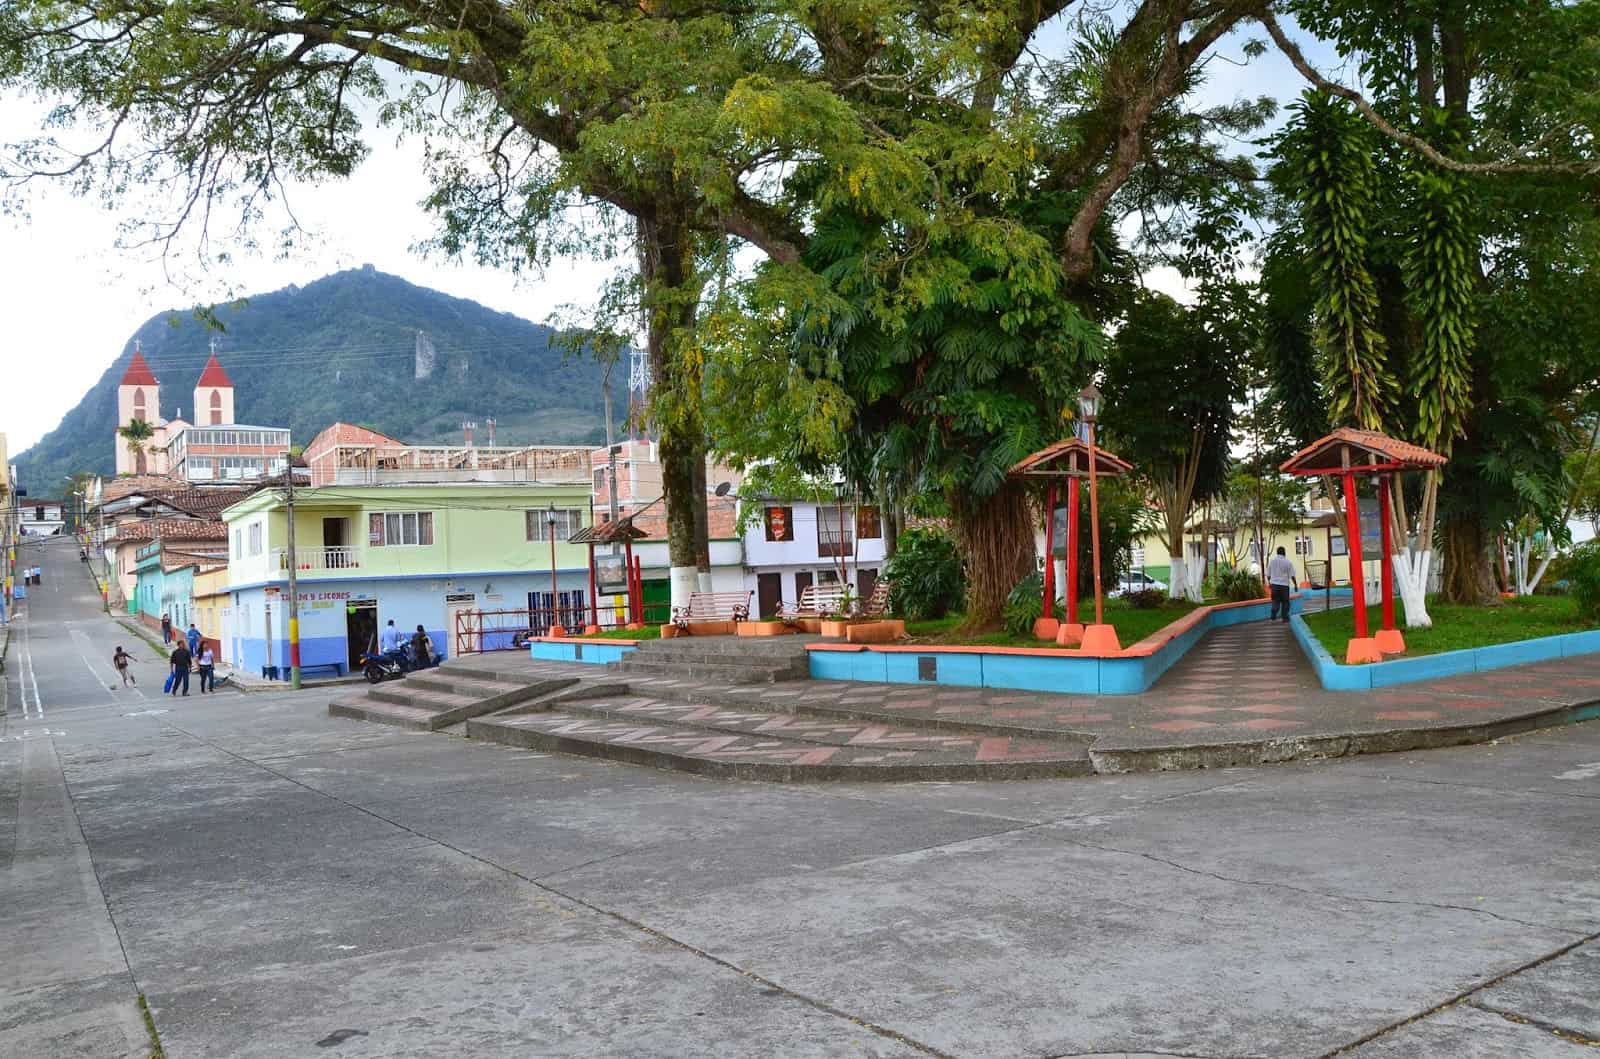 Other plaza in Quinchía, Risaralda, Colombia